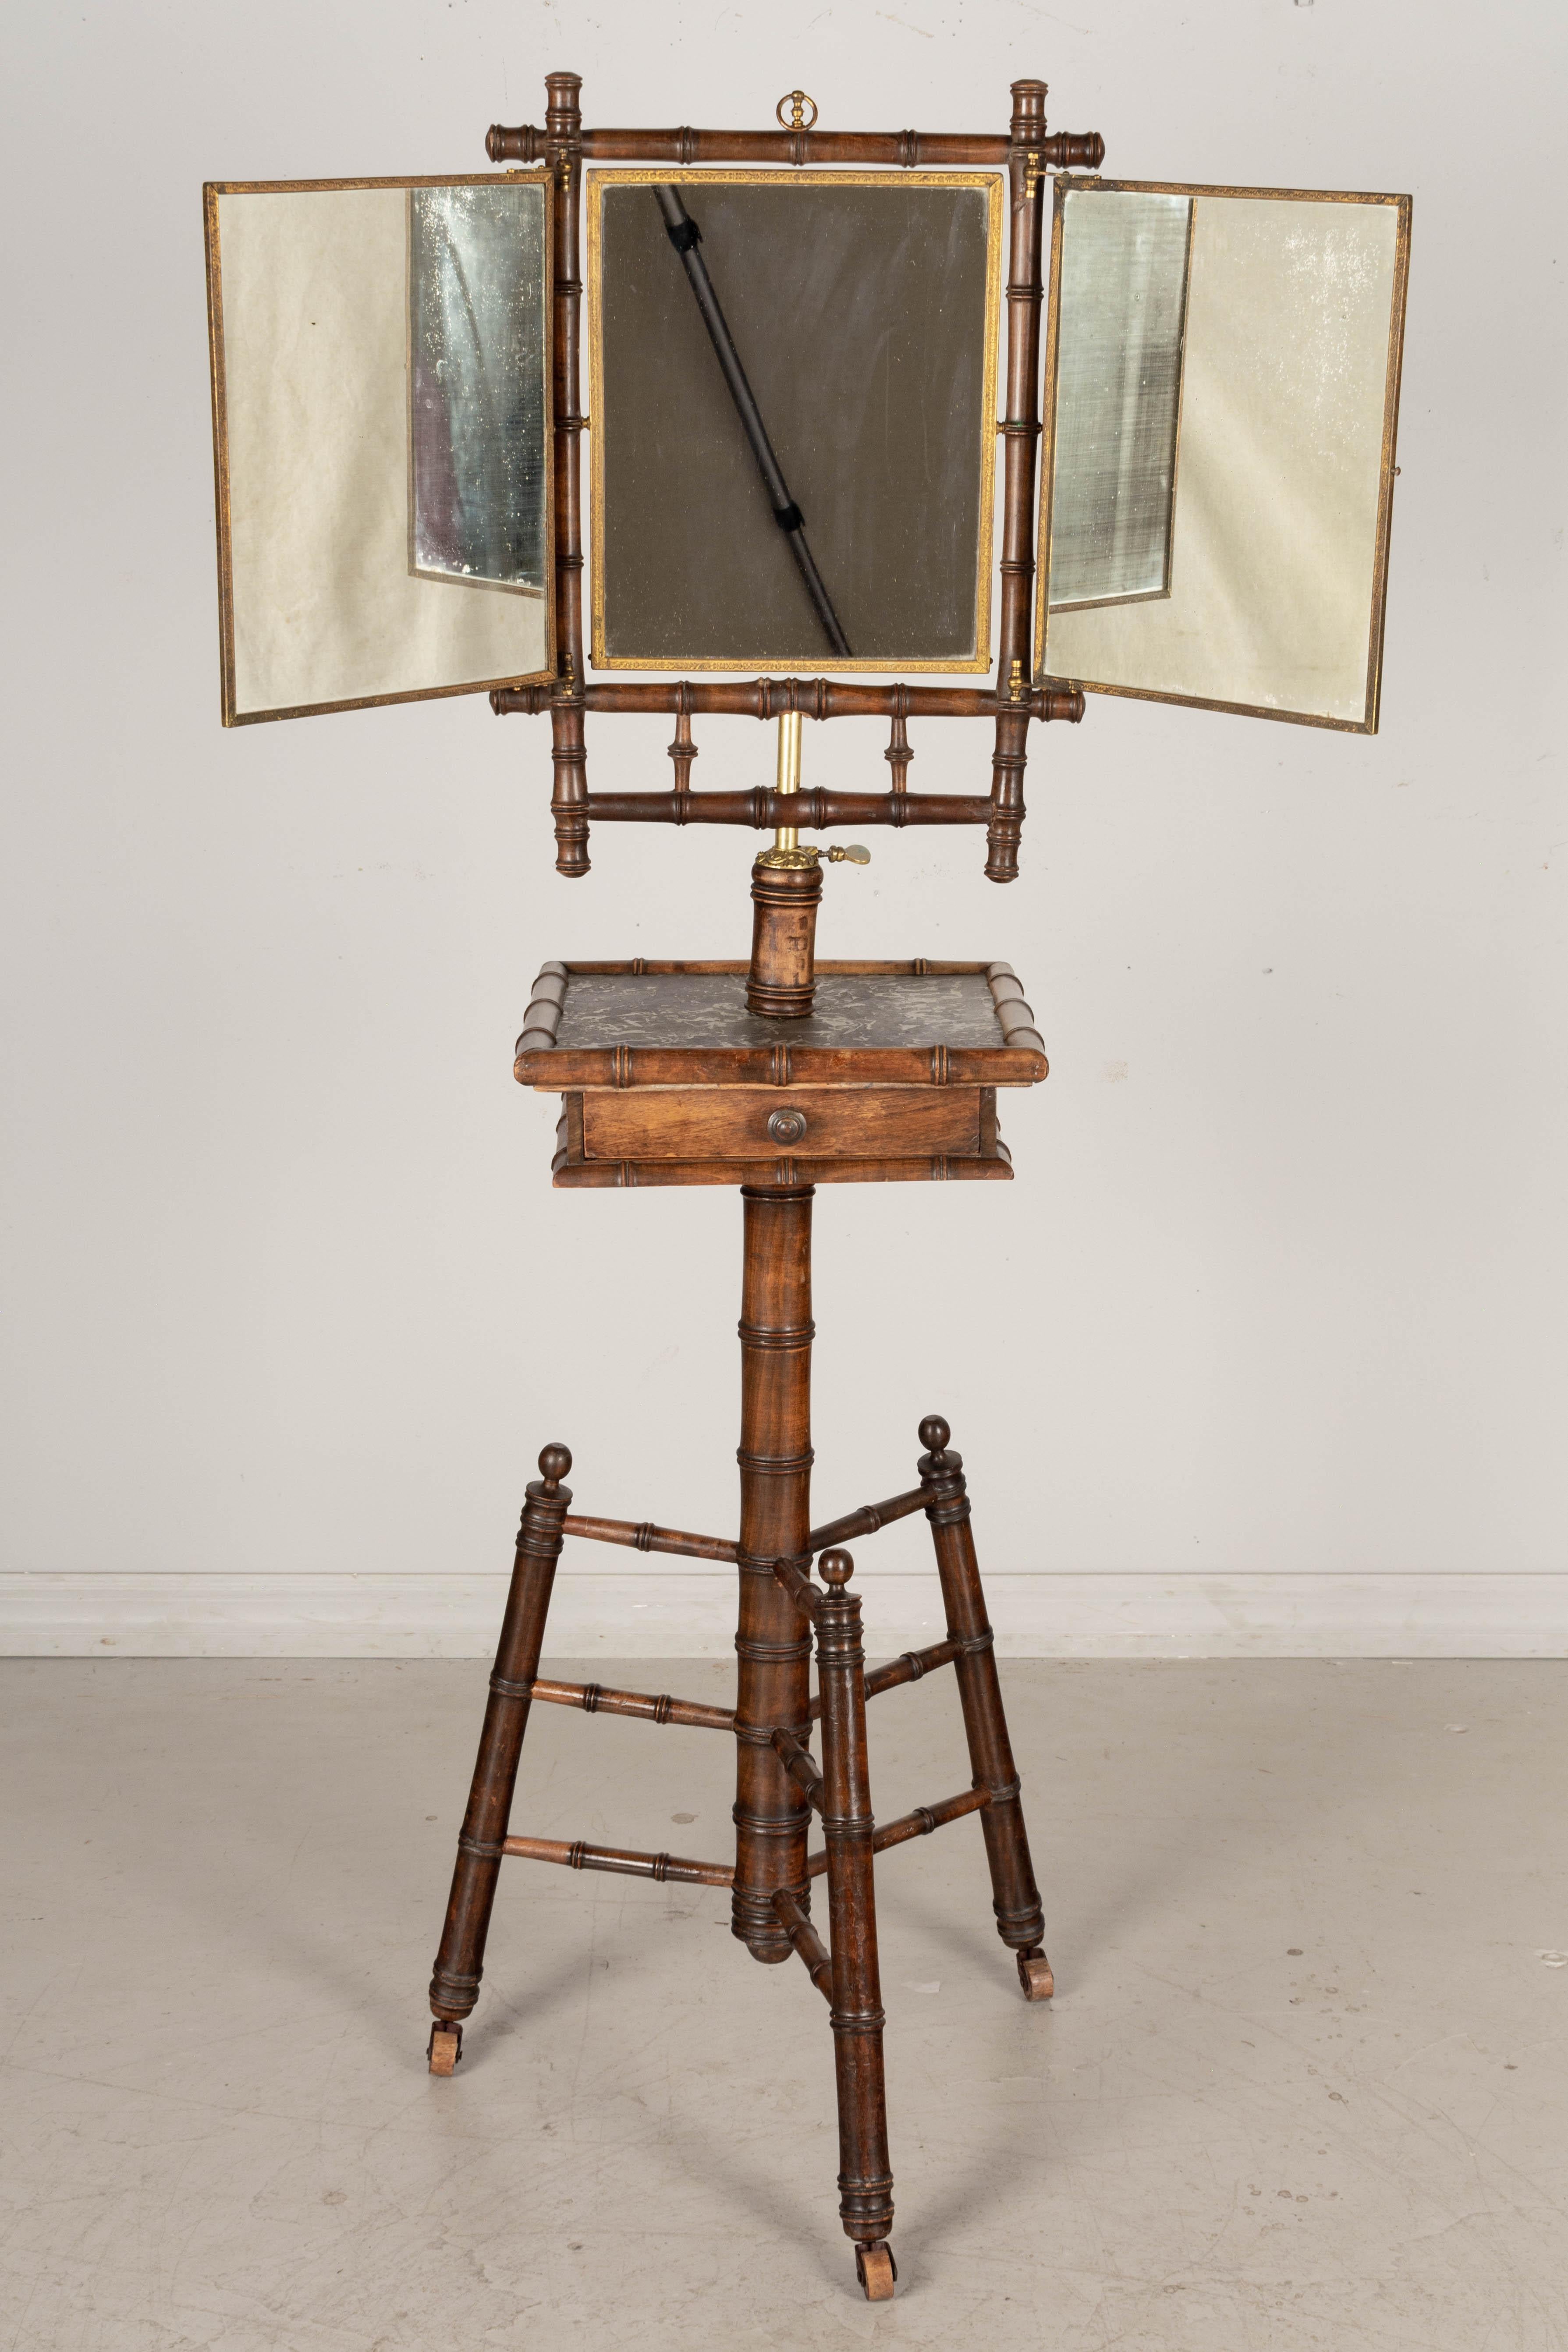 A 19th Century French faux bamboo cherry wood stand with folding mirror. Sturdy tripod base with divided drawer and marble top. Trifold mirror has brass trim and is backed with decorative anaglypta, a heavy paper with an embossed floral motif.